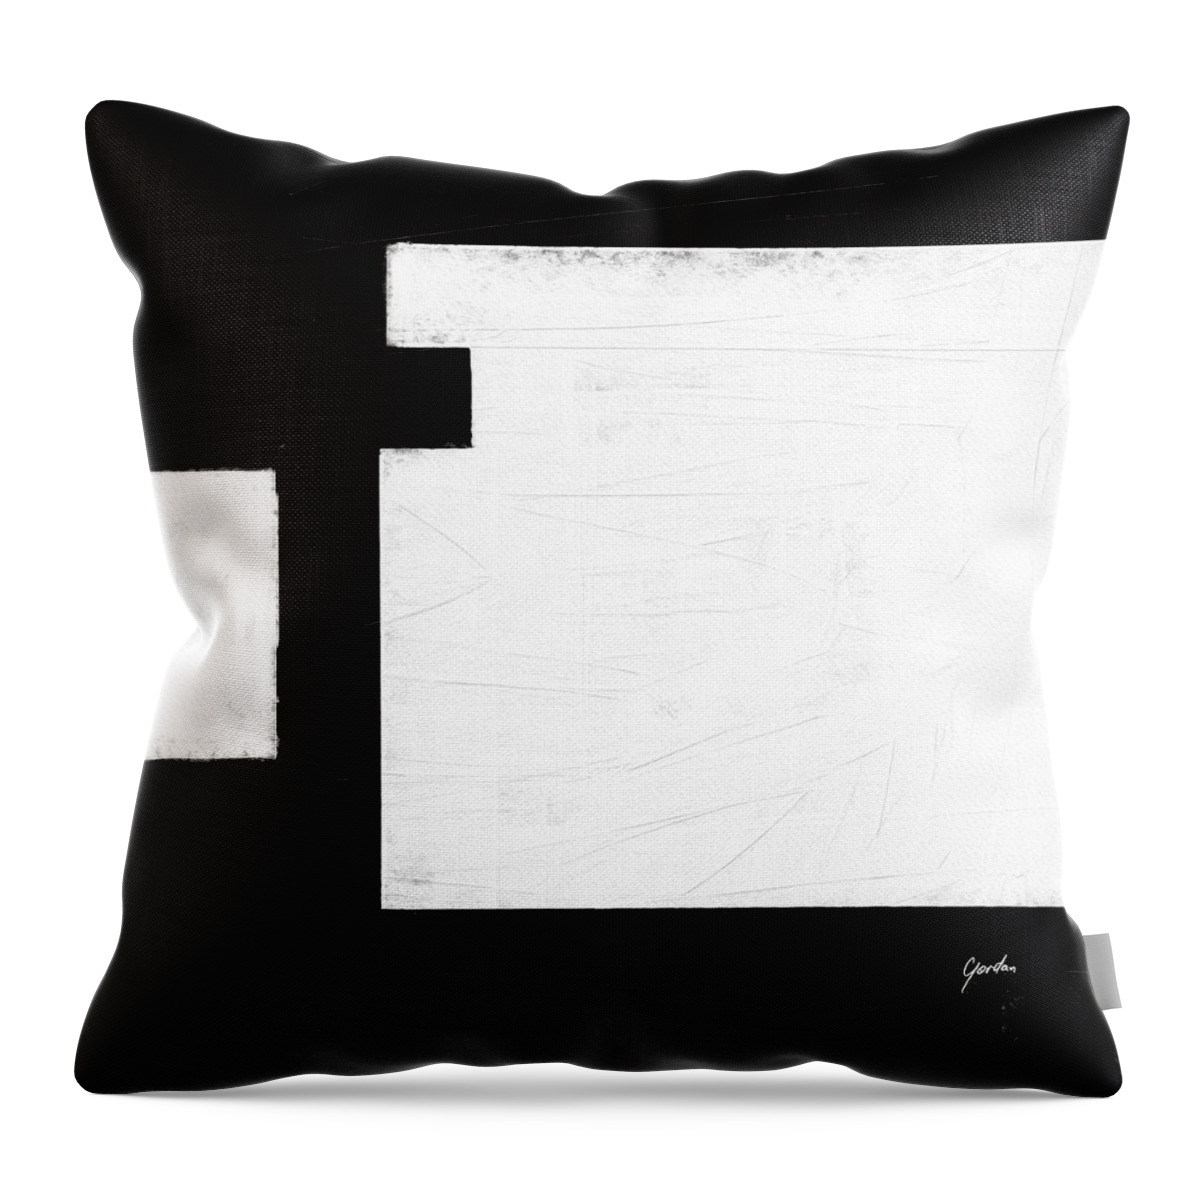 Abstract Throw Pillow featuring the painting Windows - Black And White Minimalist Geometric Painting by iAbstractArt